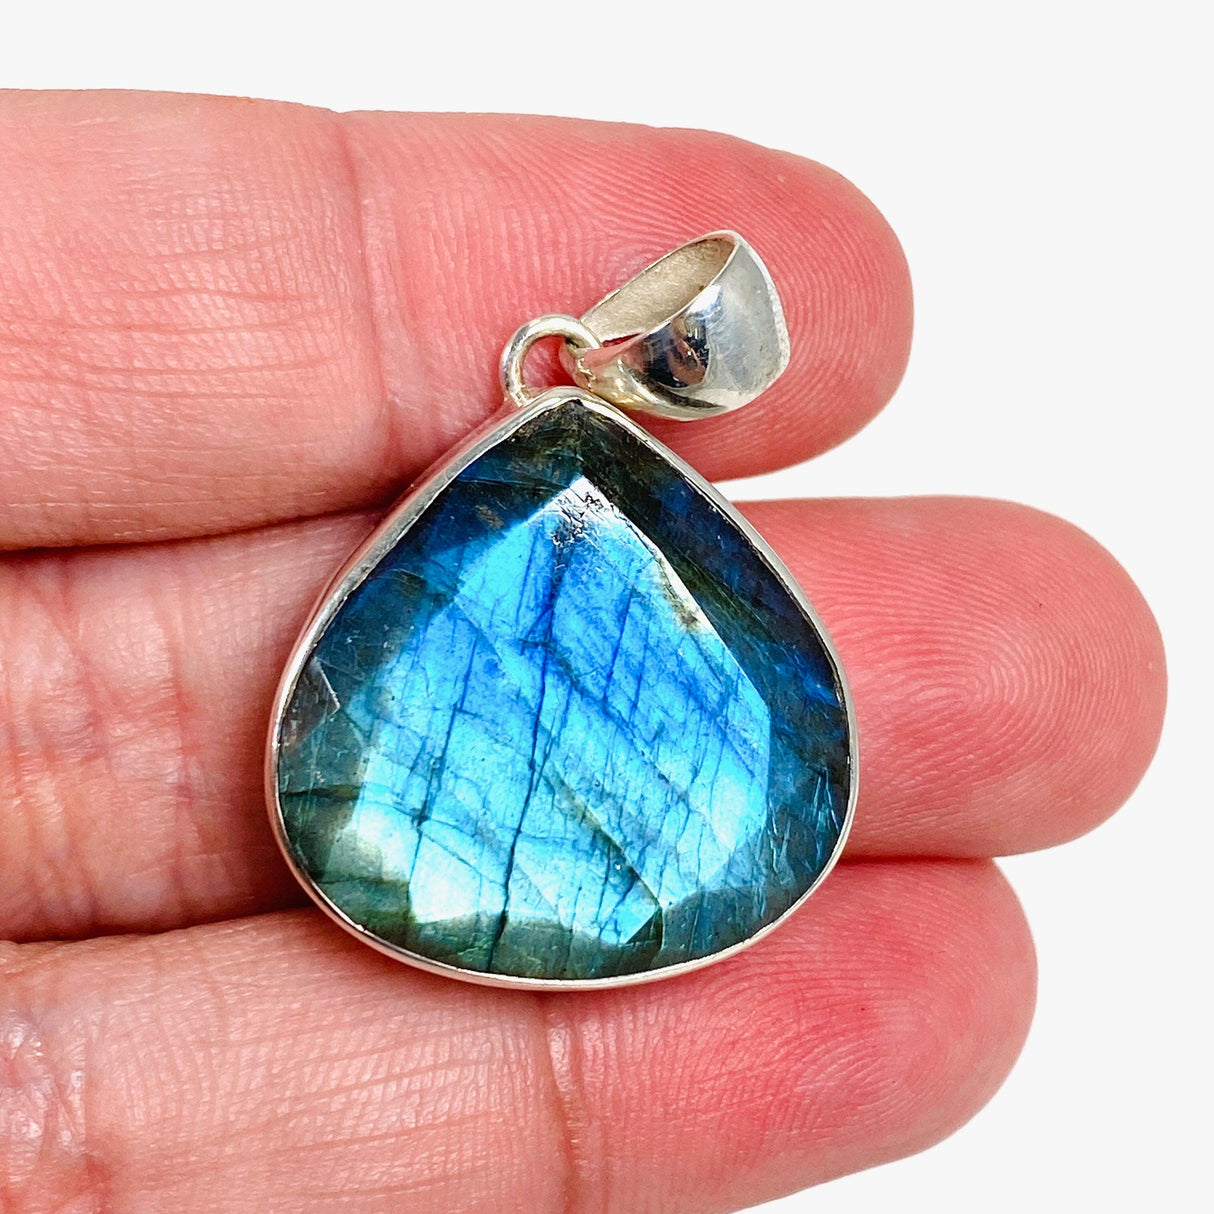 Blue iridescent Labradorite faceted gemstone and silver pendant on a hand